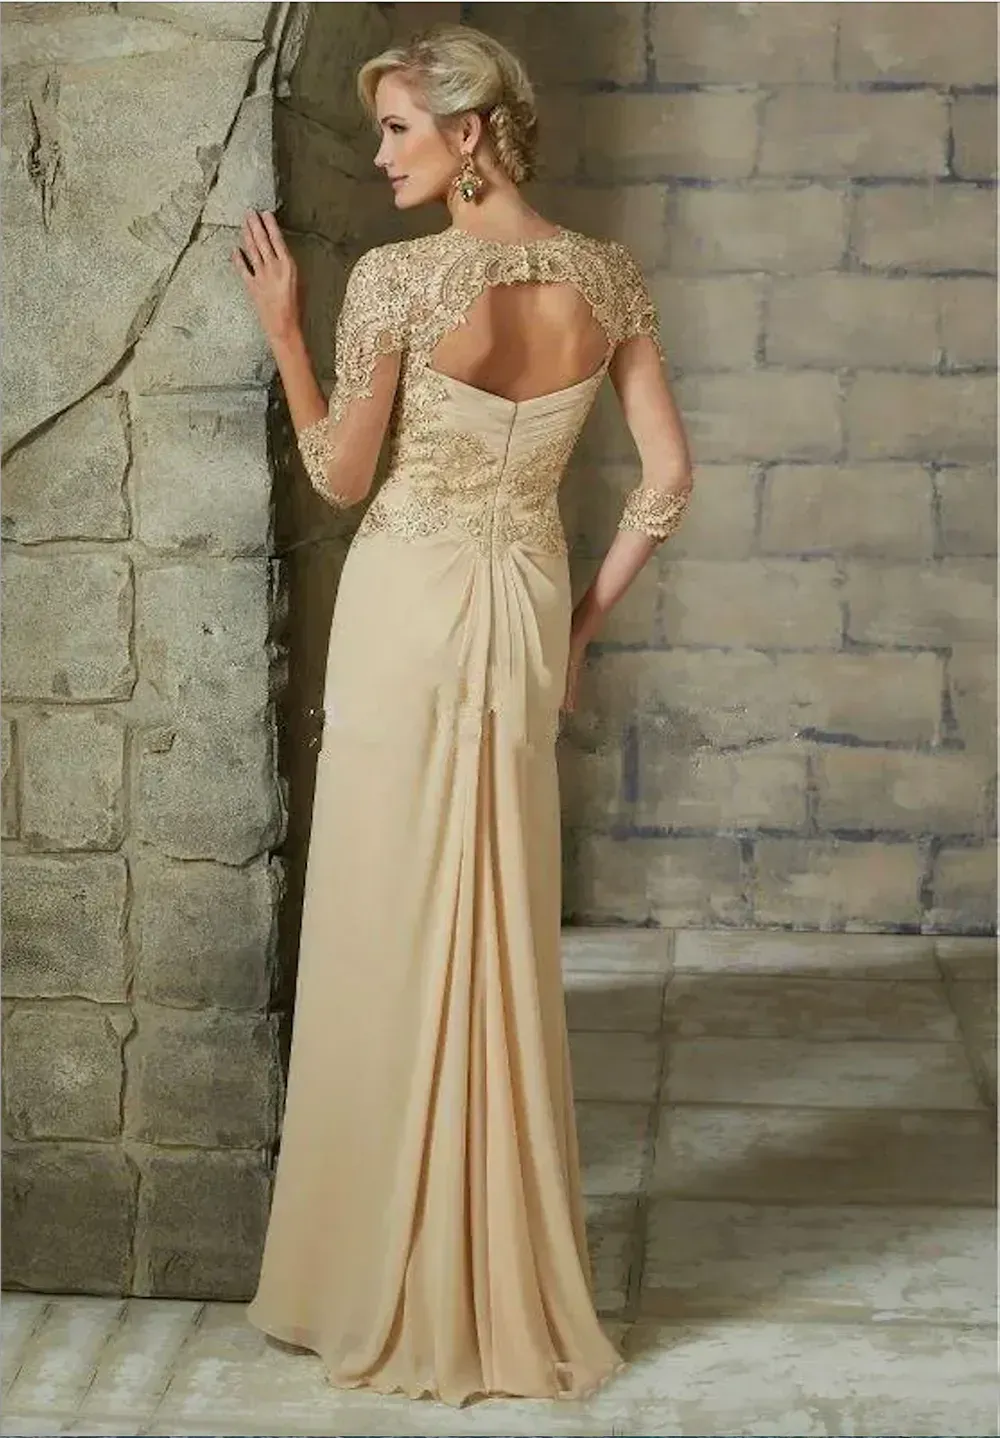 2023 Elegant Chiffon Mother of the Bride Dresses long Sleeves Champagne Appliques Lace Formal Evening Gowns Plus Size Custom Made